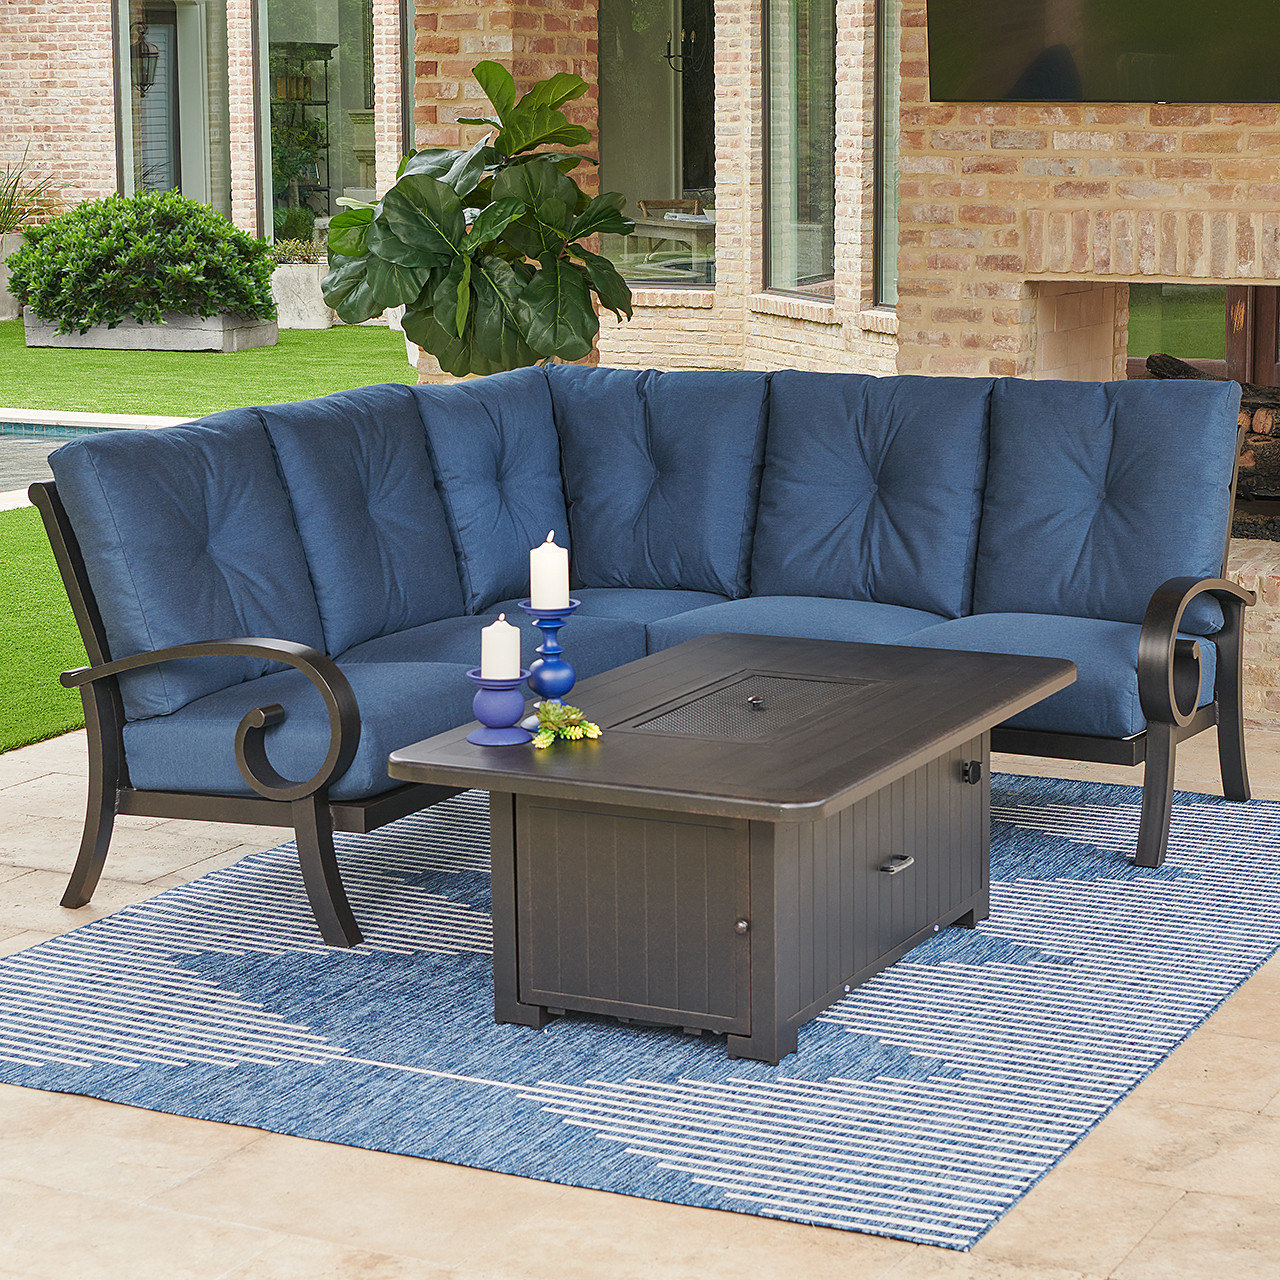 Solstice Aged Bronze Aluminum with Cushions 4 Piece Sectional Group + 58 x 36 in. Fire Pit Coffee Table